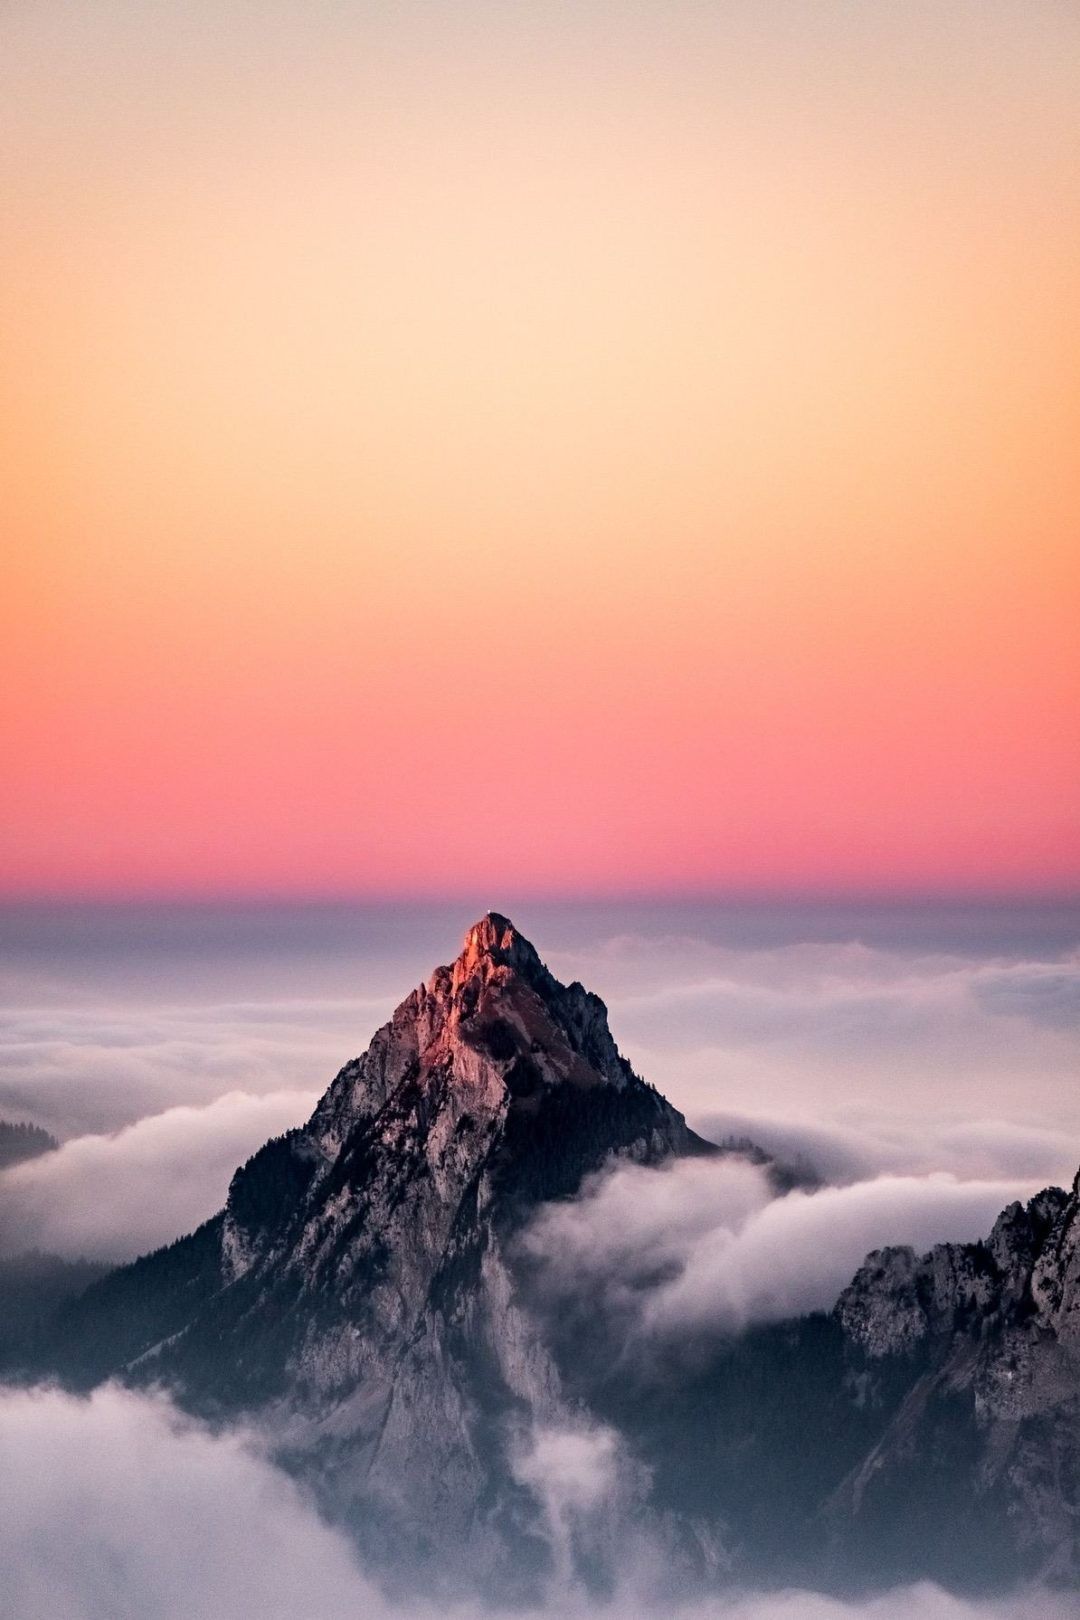 A mountain peak with a pink sky in the background - Mountain